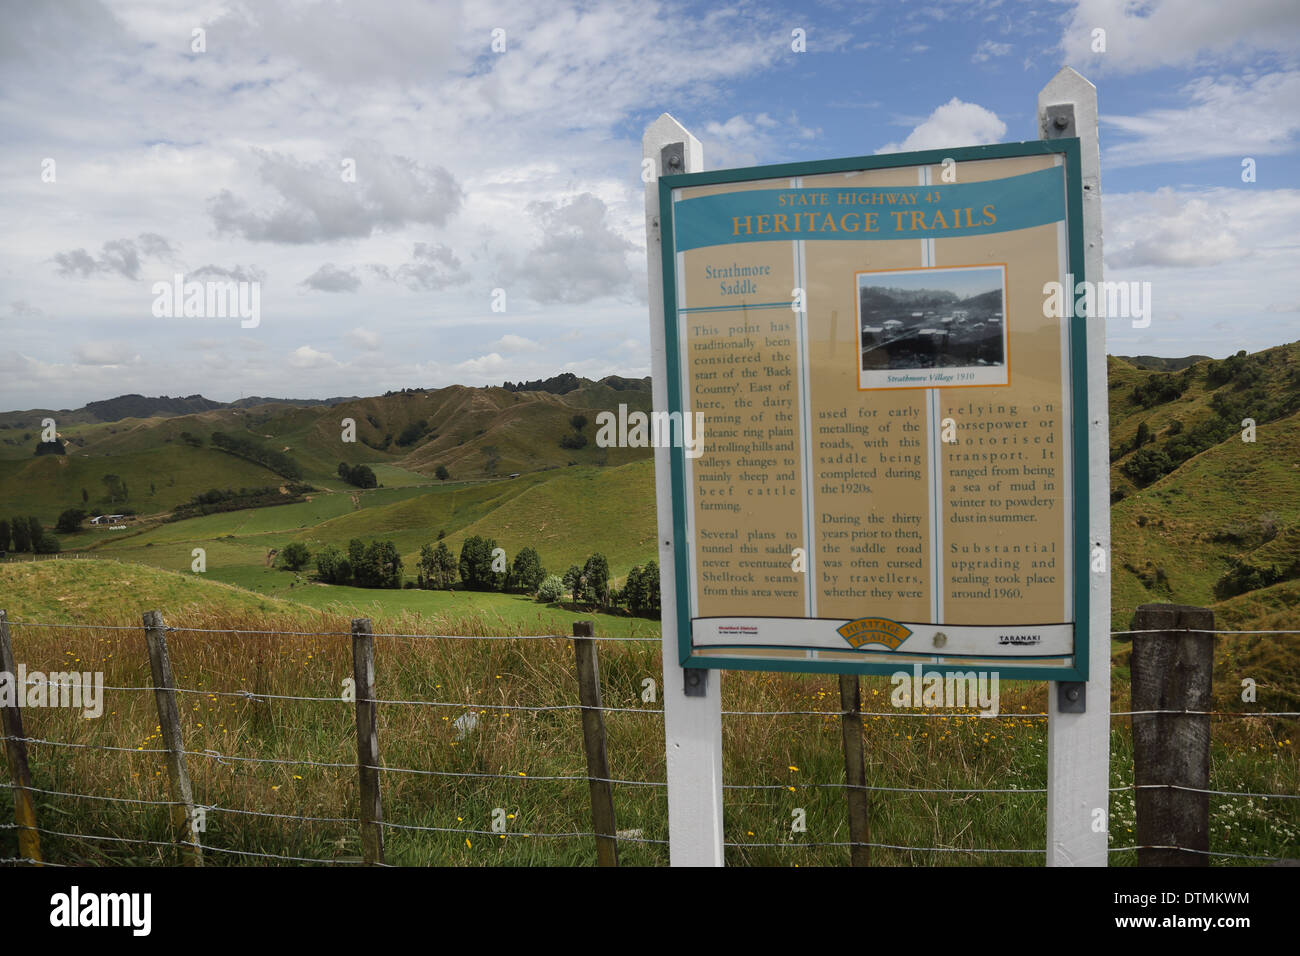 View of sign and Strathmore Saddle from the Forgotten World Highway (SH 43), Whanganui National Park, North Island, New Zealand Stock Photo